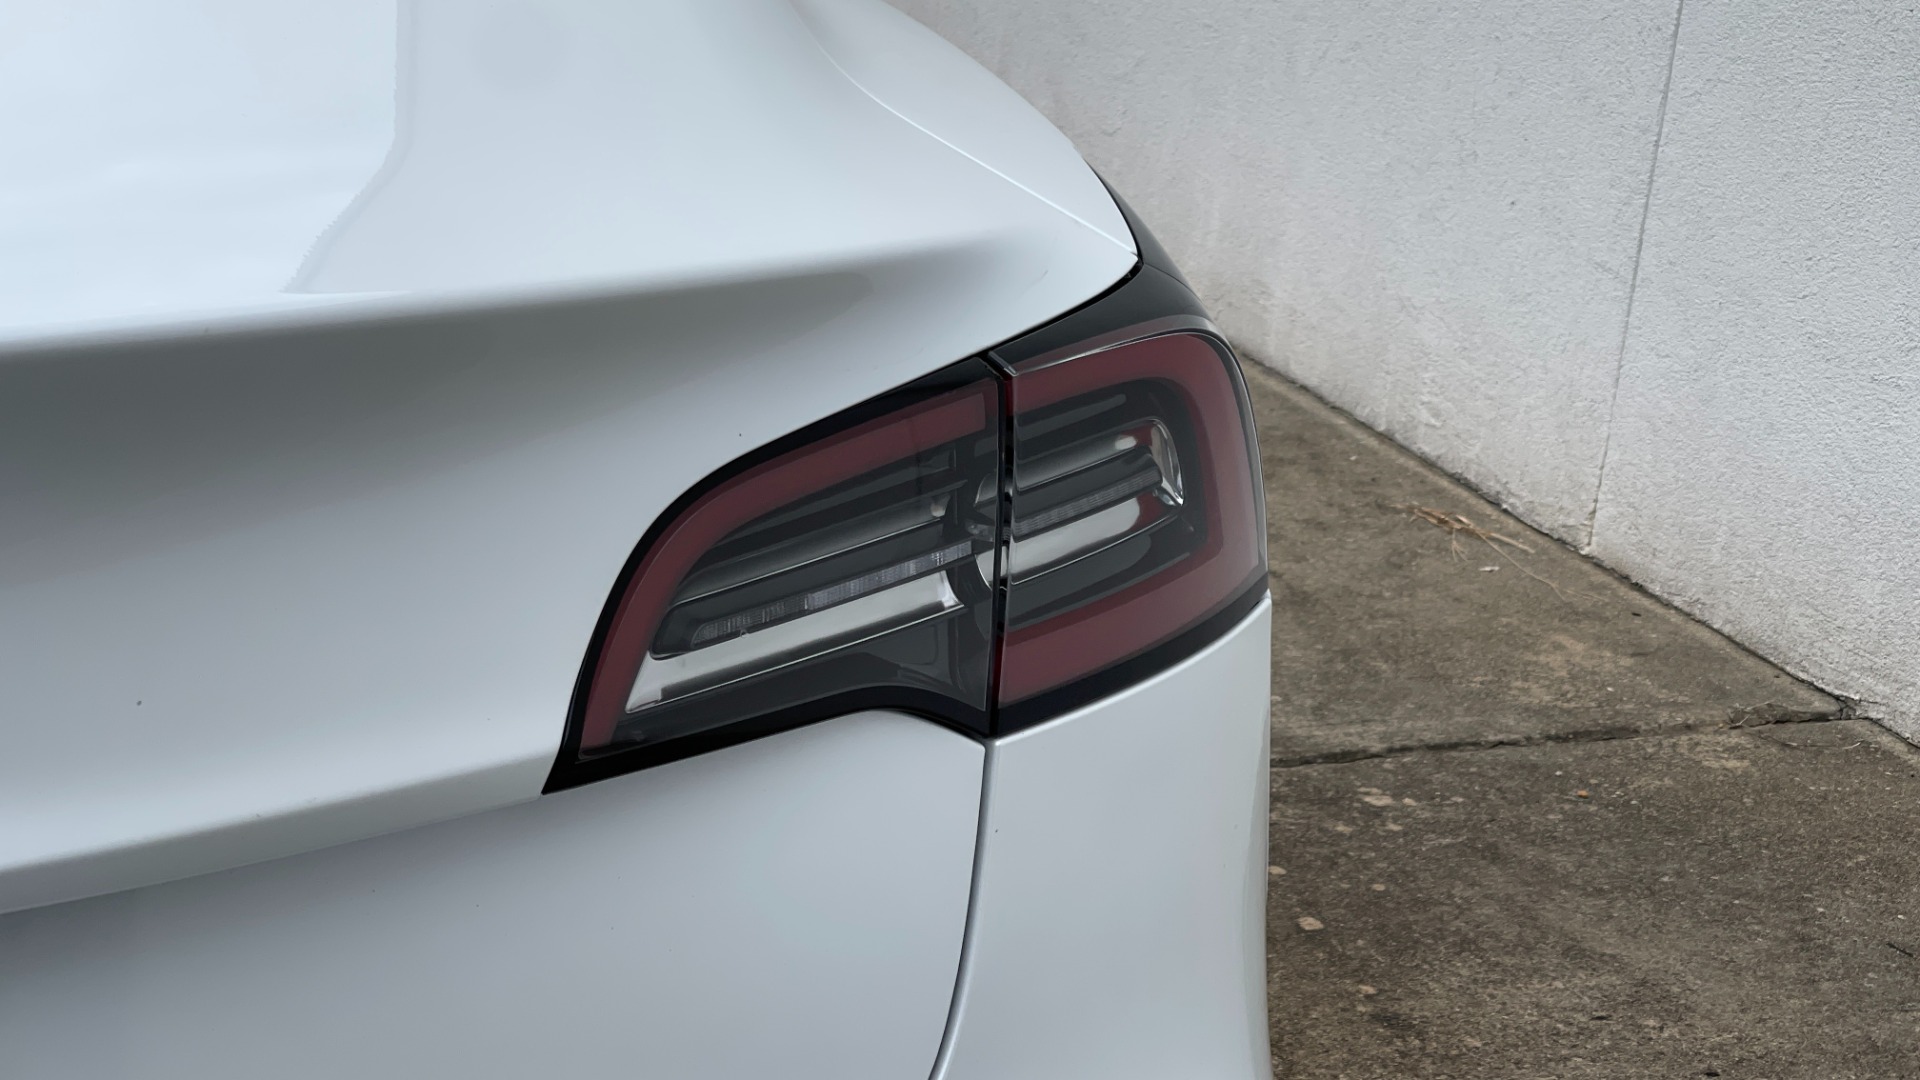 Used 2020 Tesla Model 3 STANDARD RANGE PLUS / AUTOPILOT / STANDARD CONNECTIVITY / PEARL WHITE for sale $46,995 at Formula Imports in Charlotte NC 28227 30